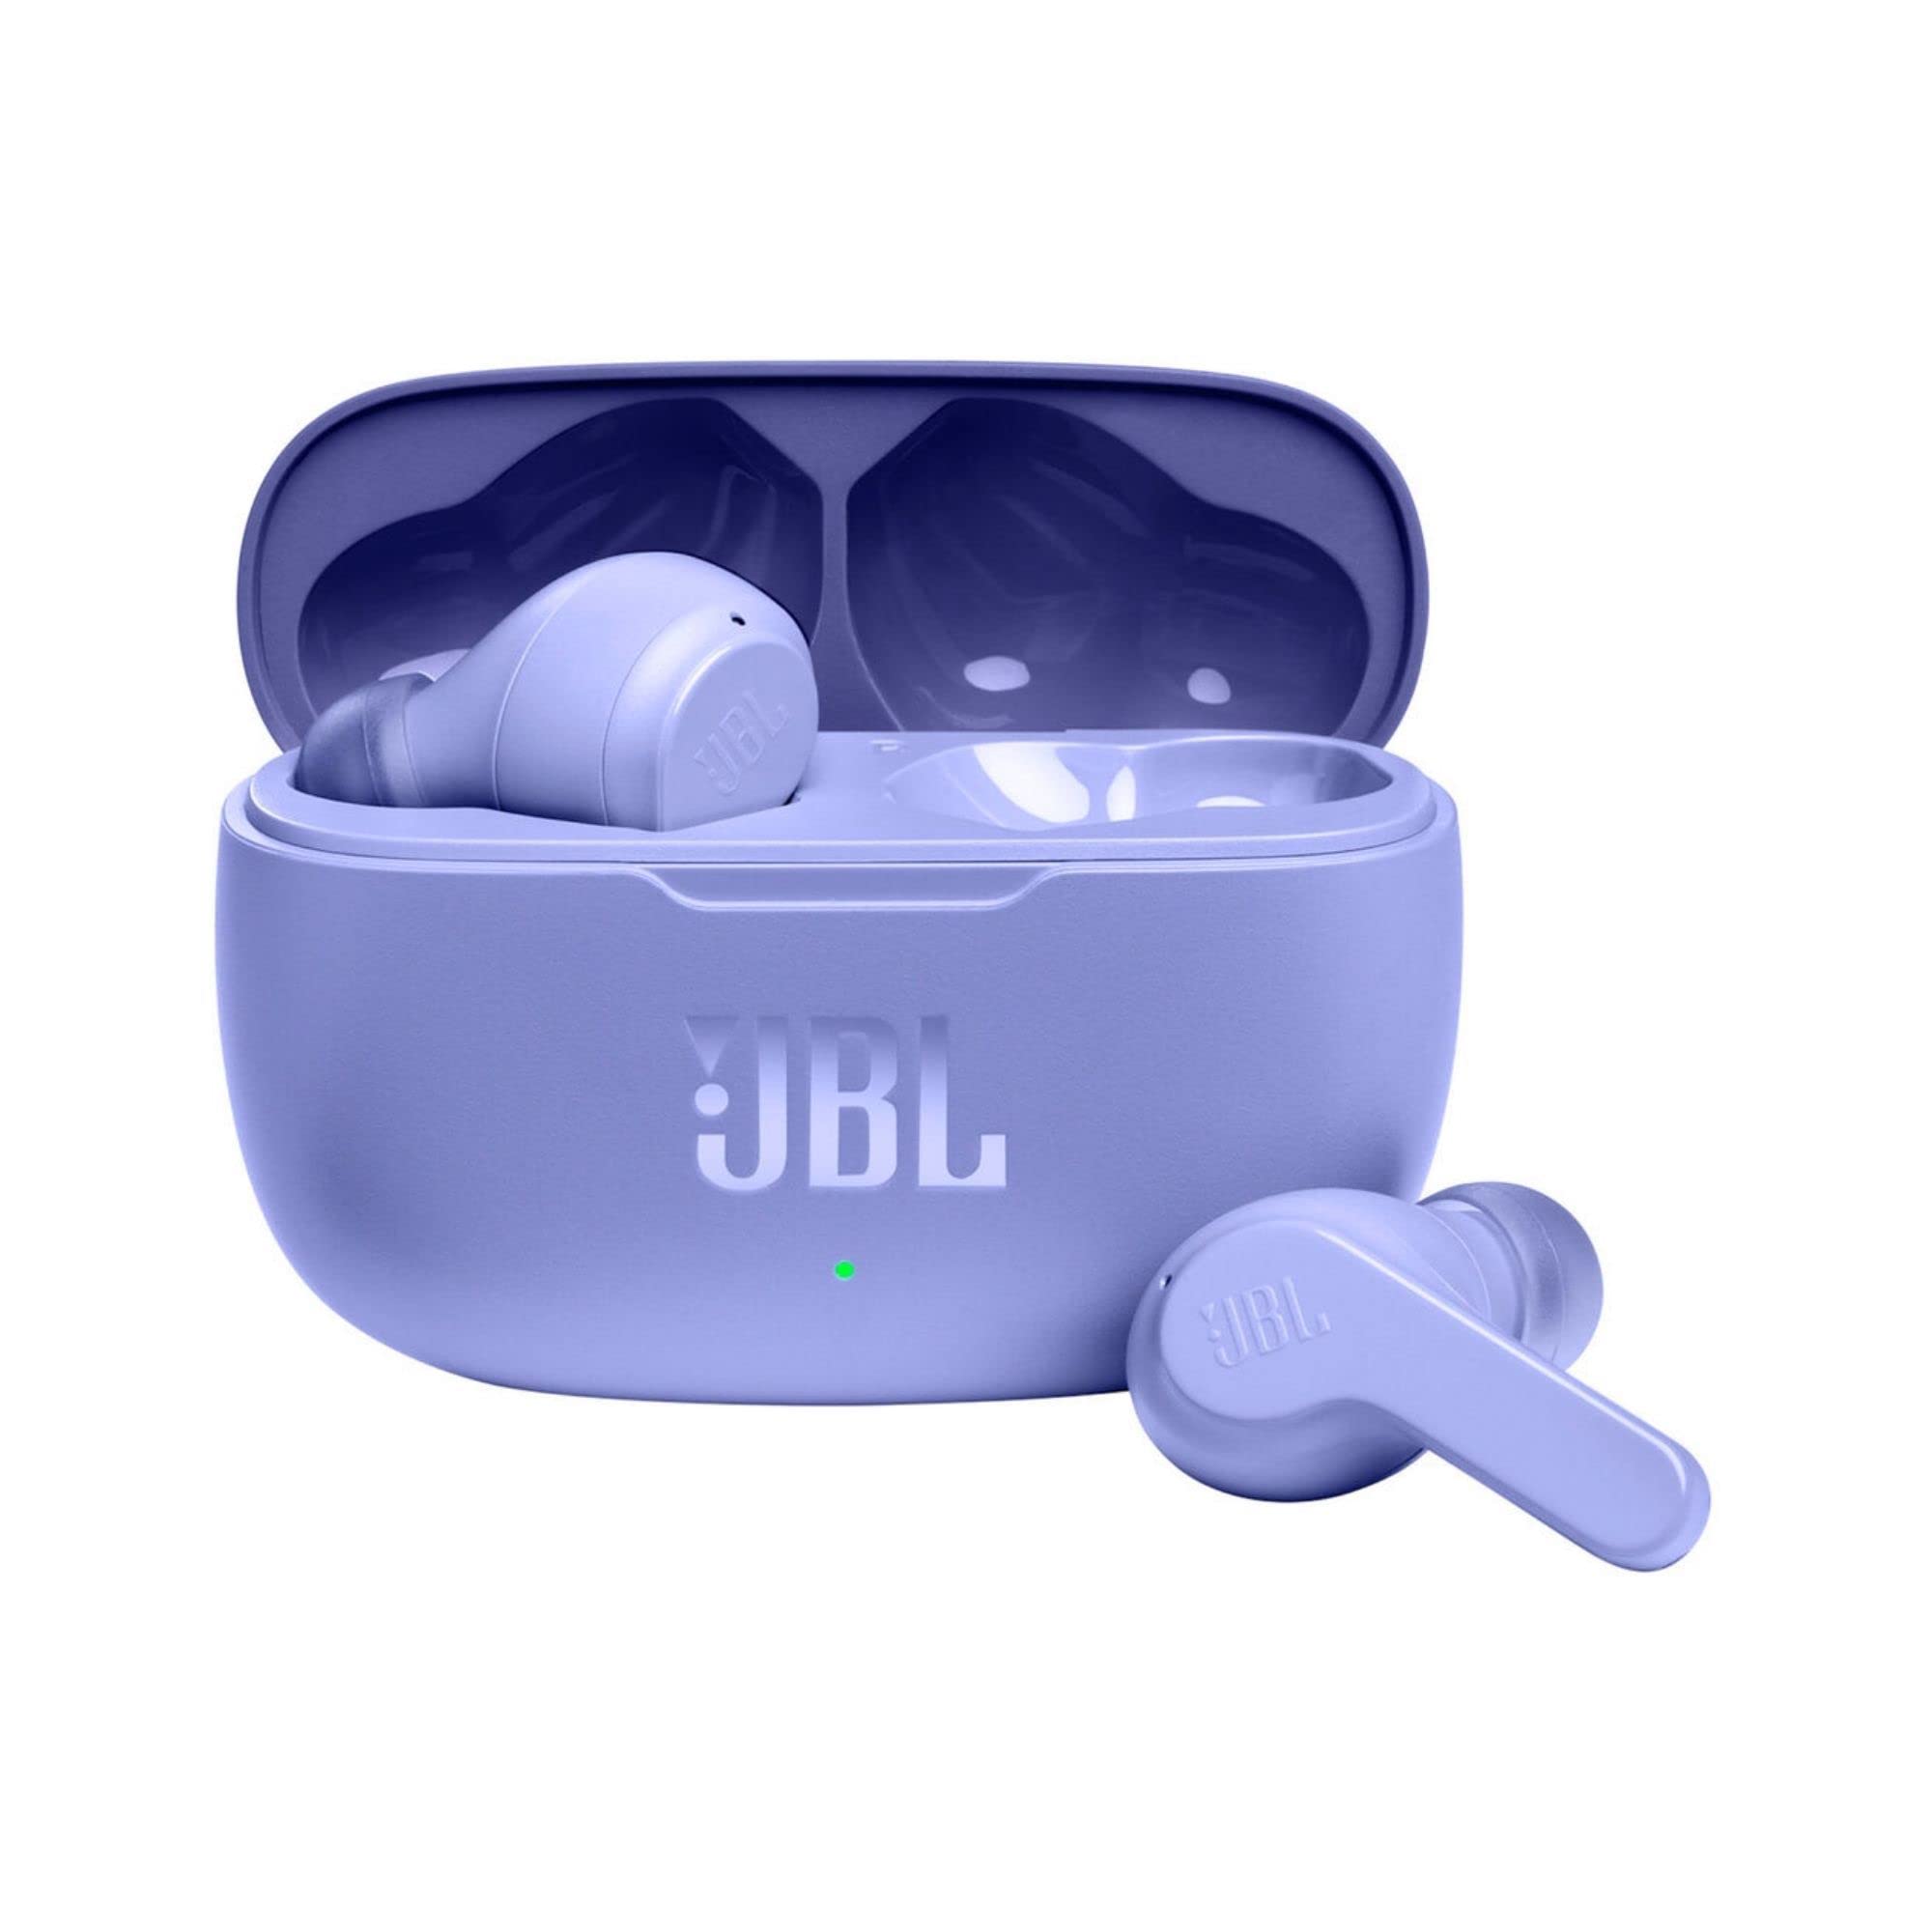 powering-on-your-jbl-wireless-earbuds-quick-instructions